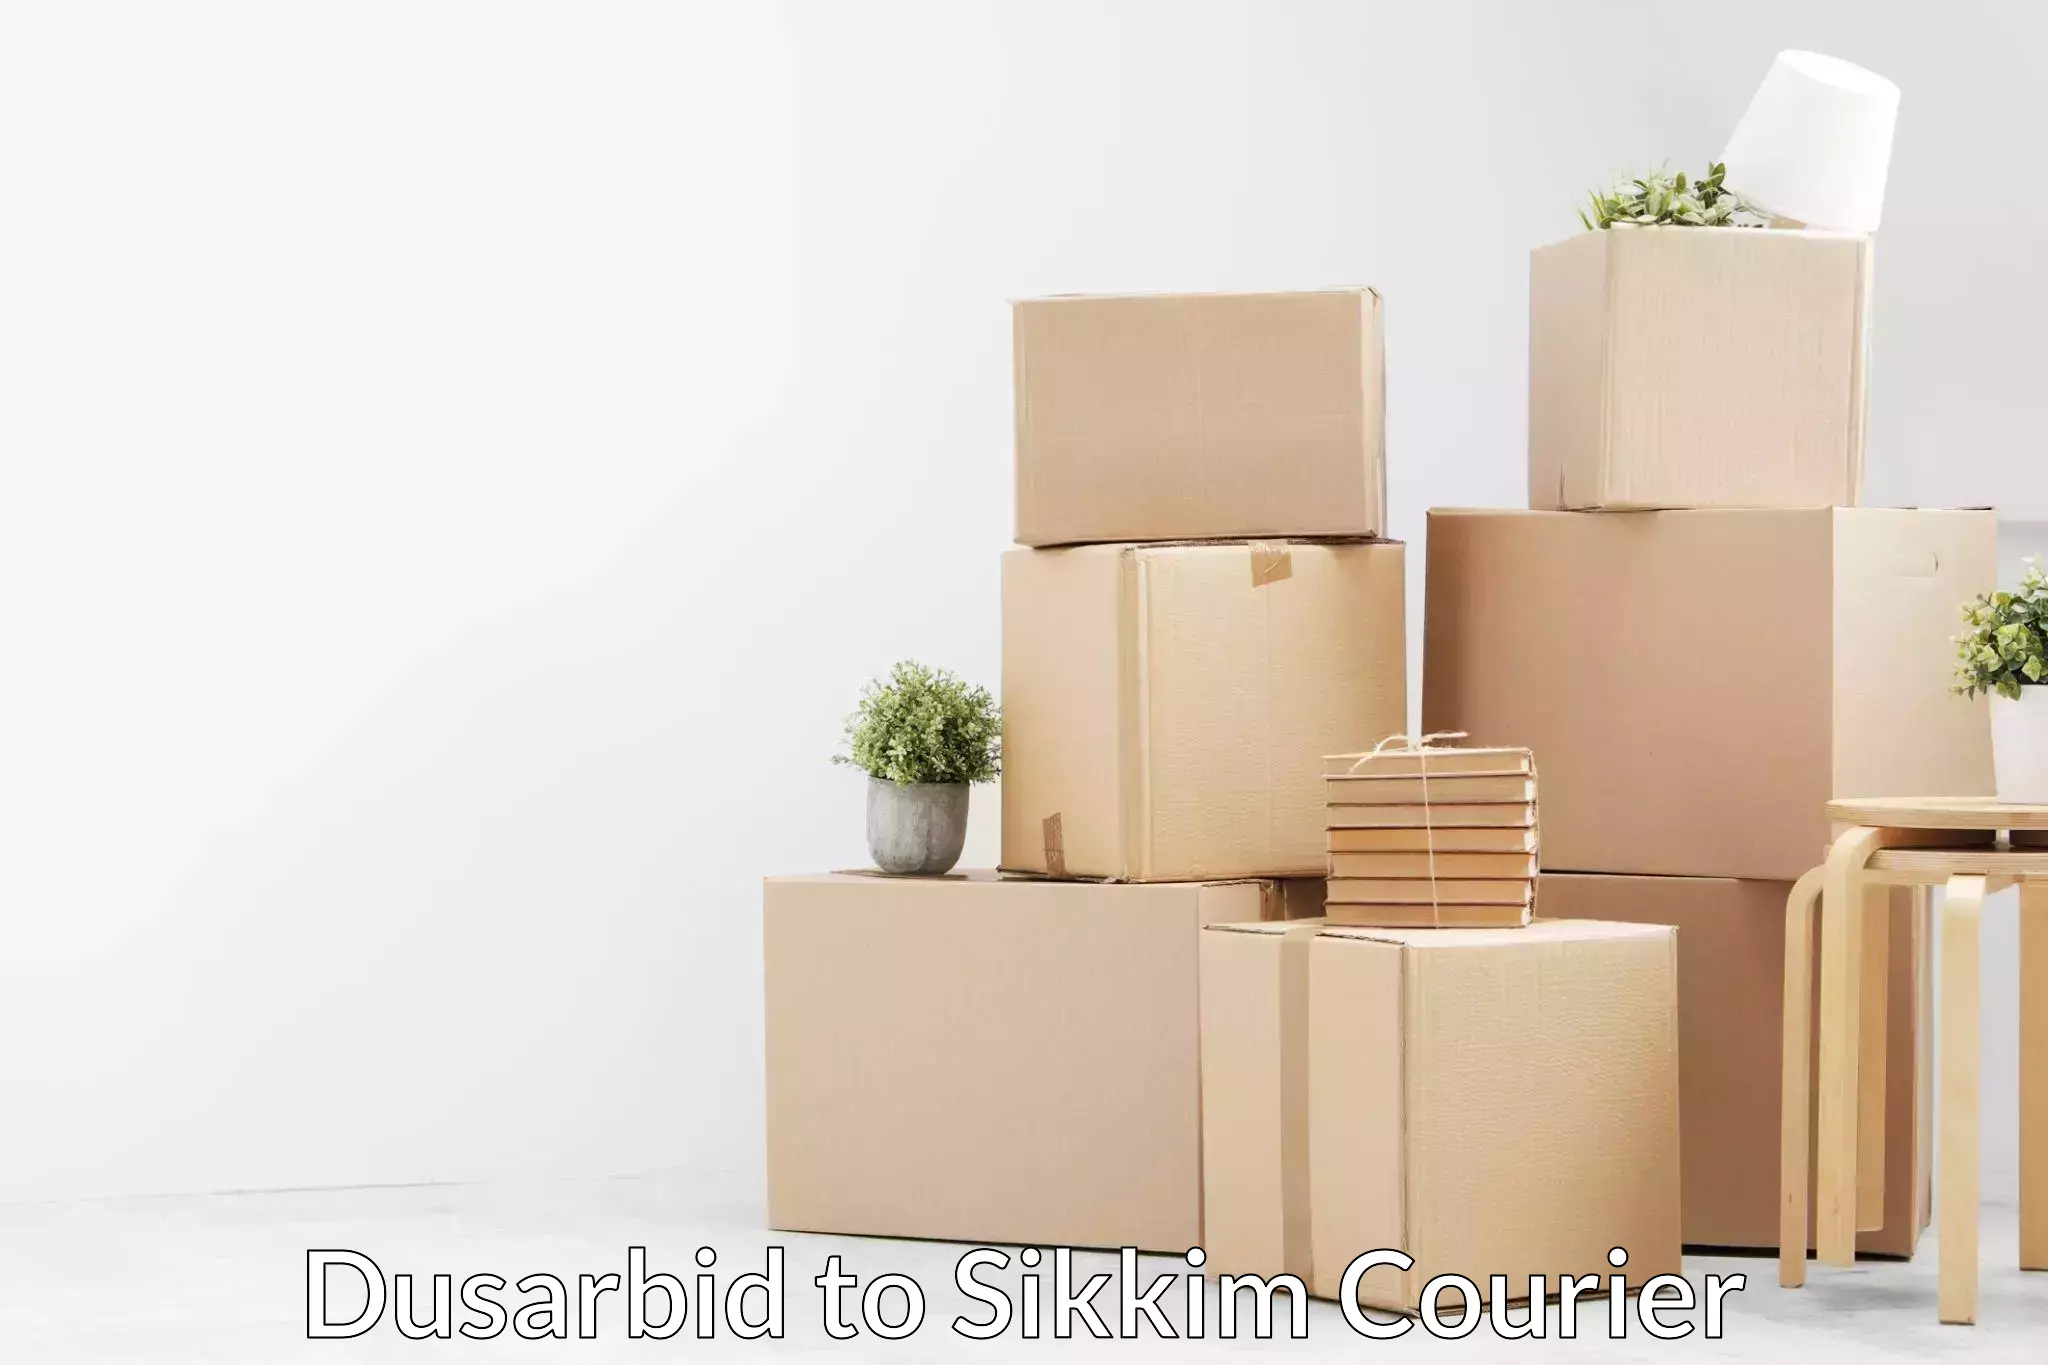 Residential moving services in Dusarbid to Sikkim